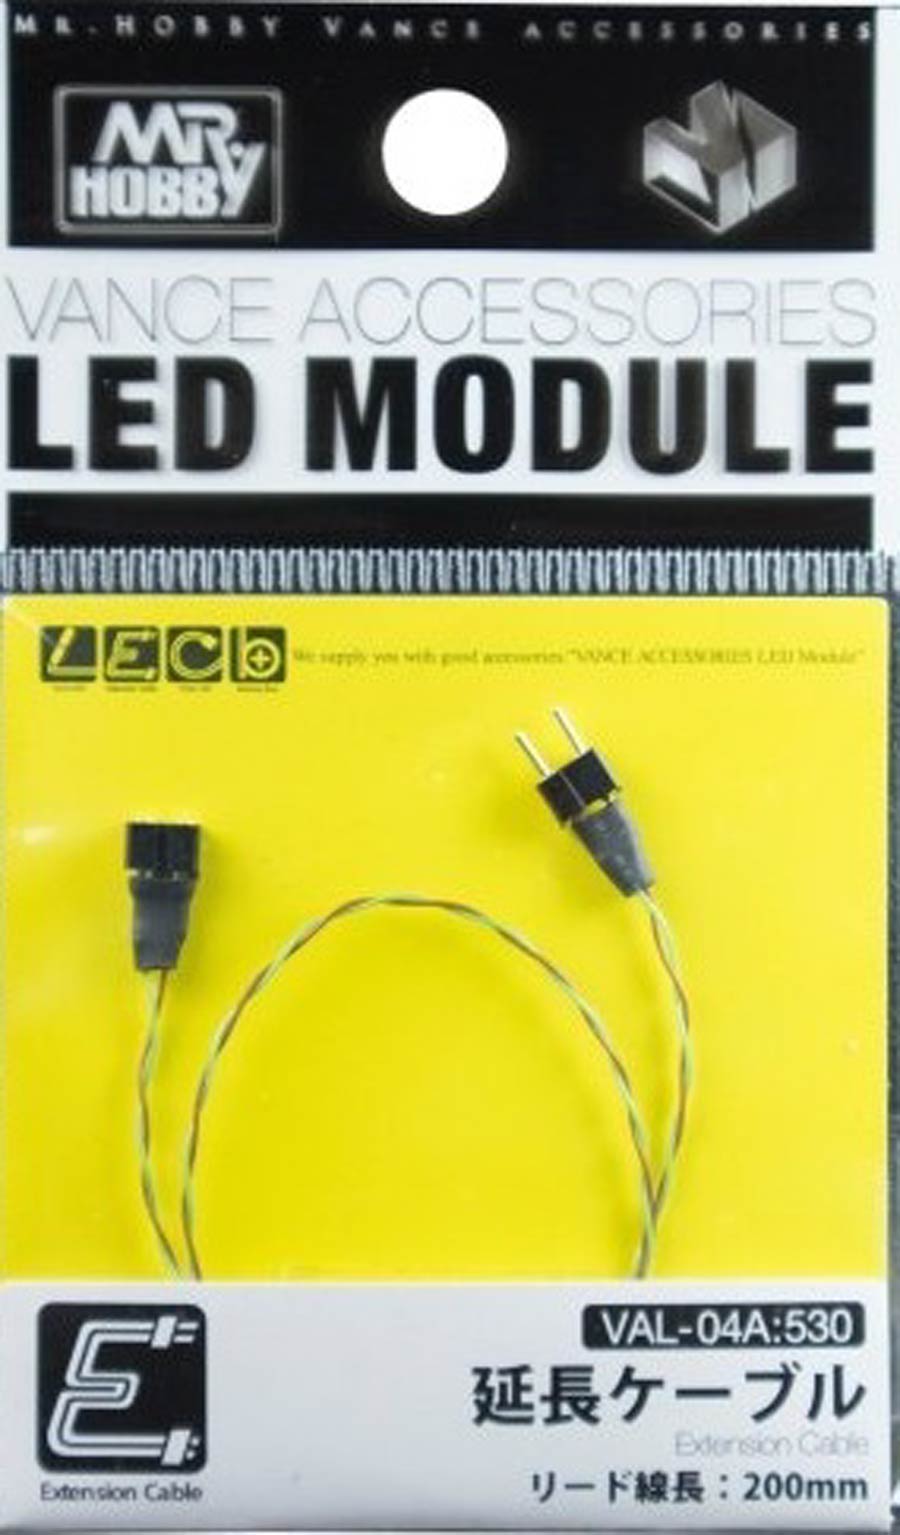 Mr. Hobby Vance Accessories LED Module -  Bag Of 10 Units - Extension Cable